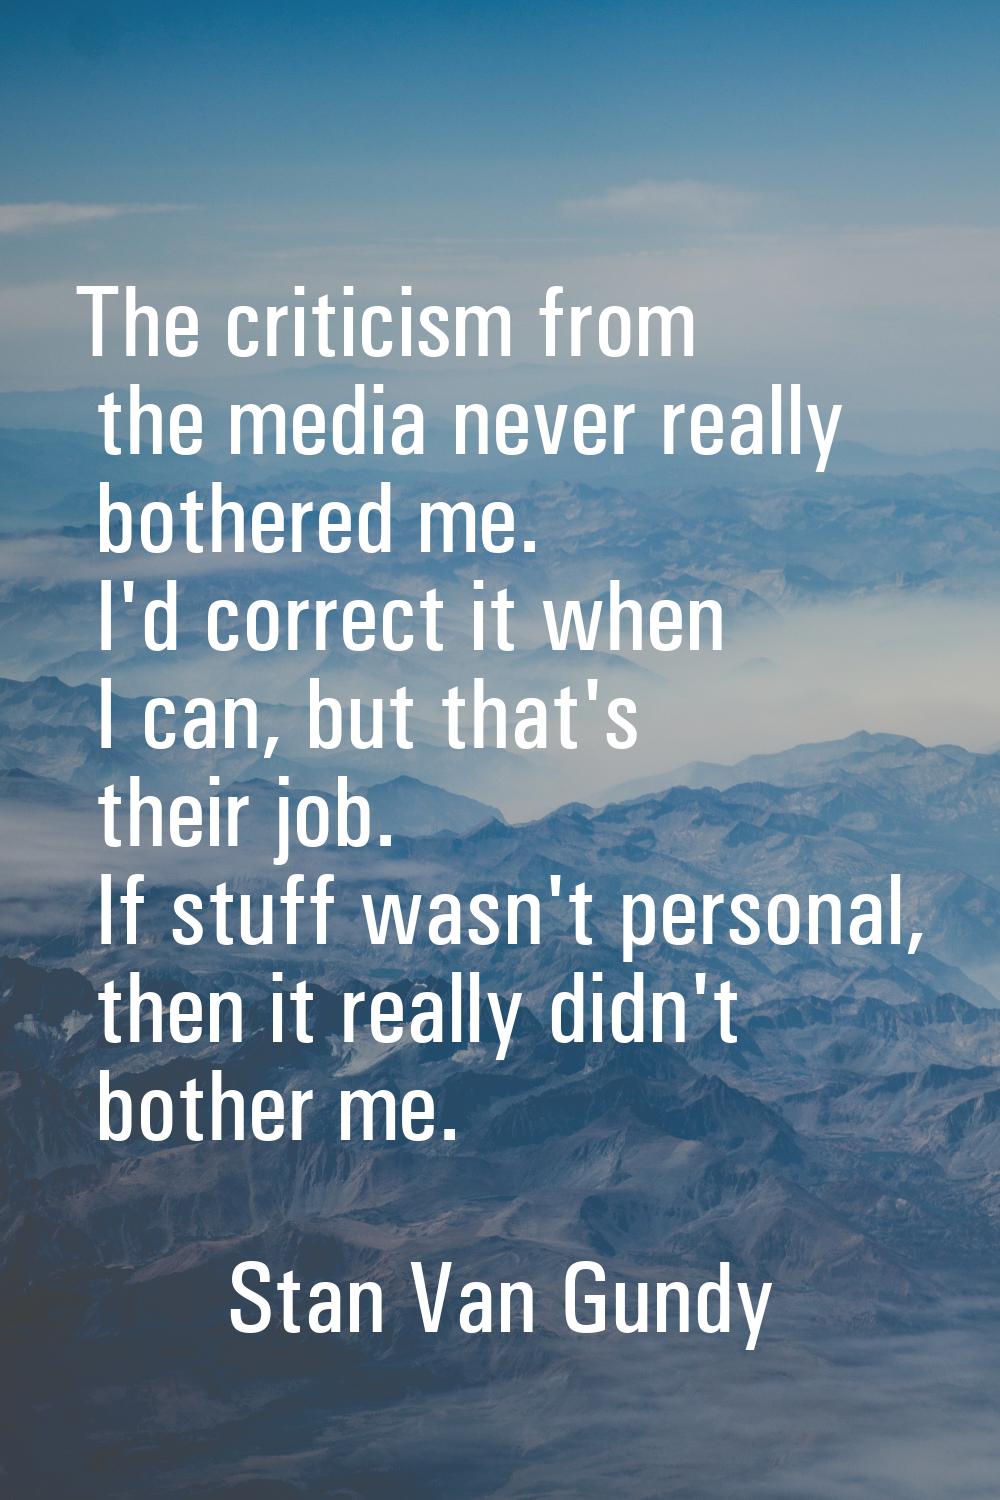 The criticism from the media never really bothered me. I'd correct it when I can, but that's their 